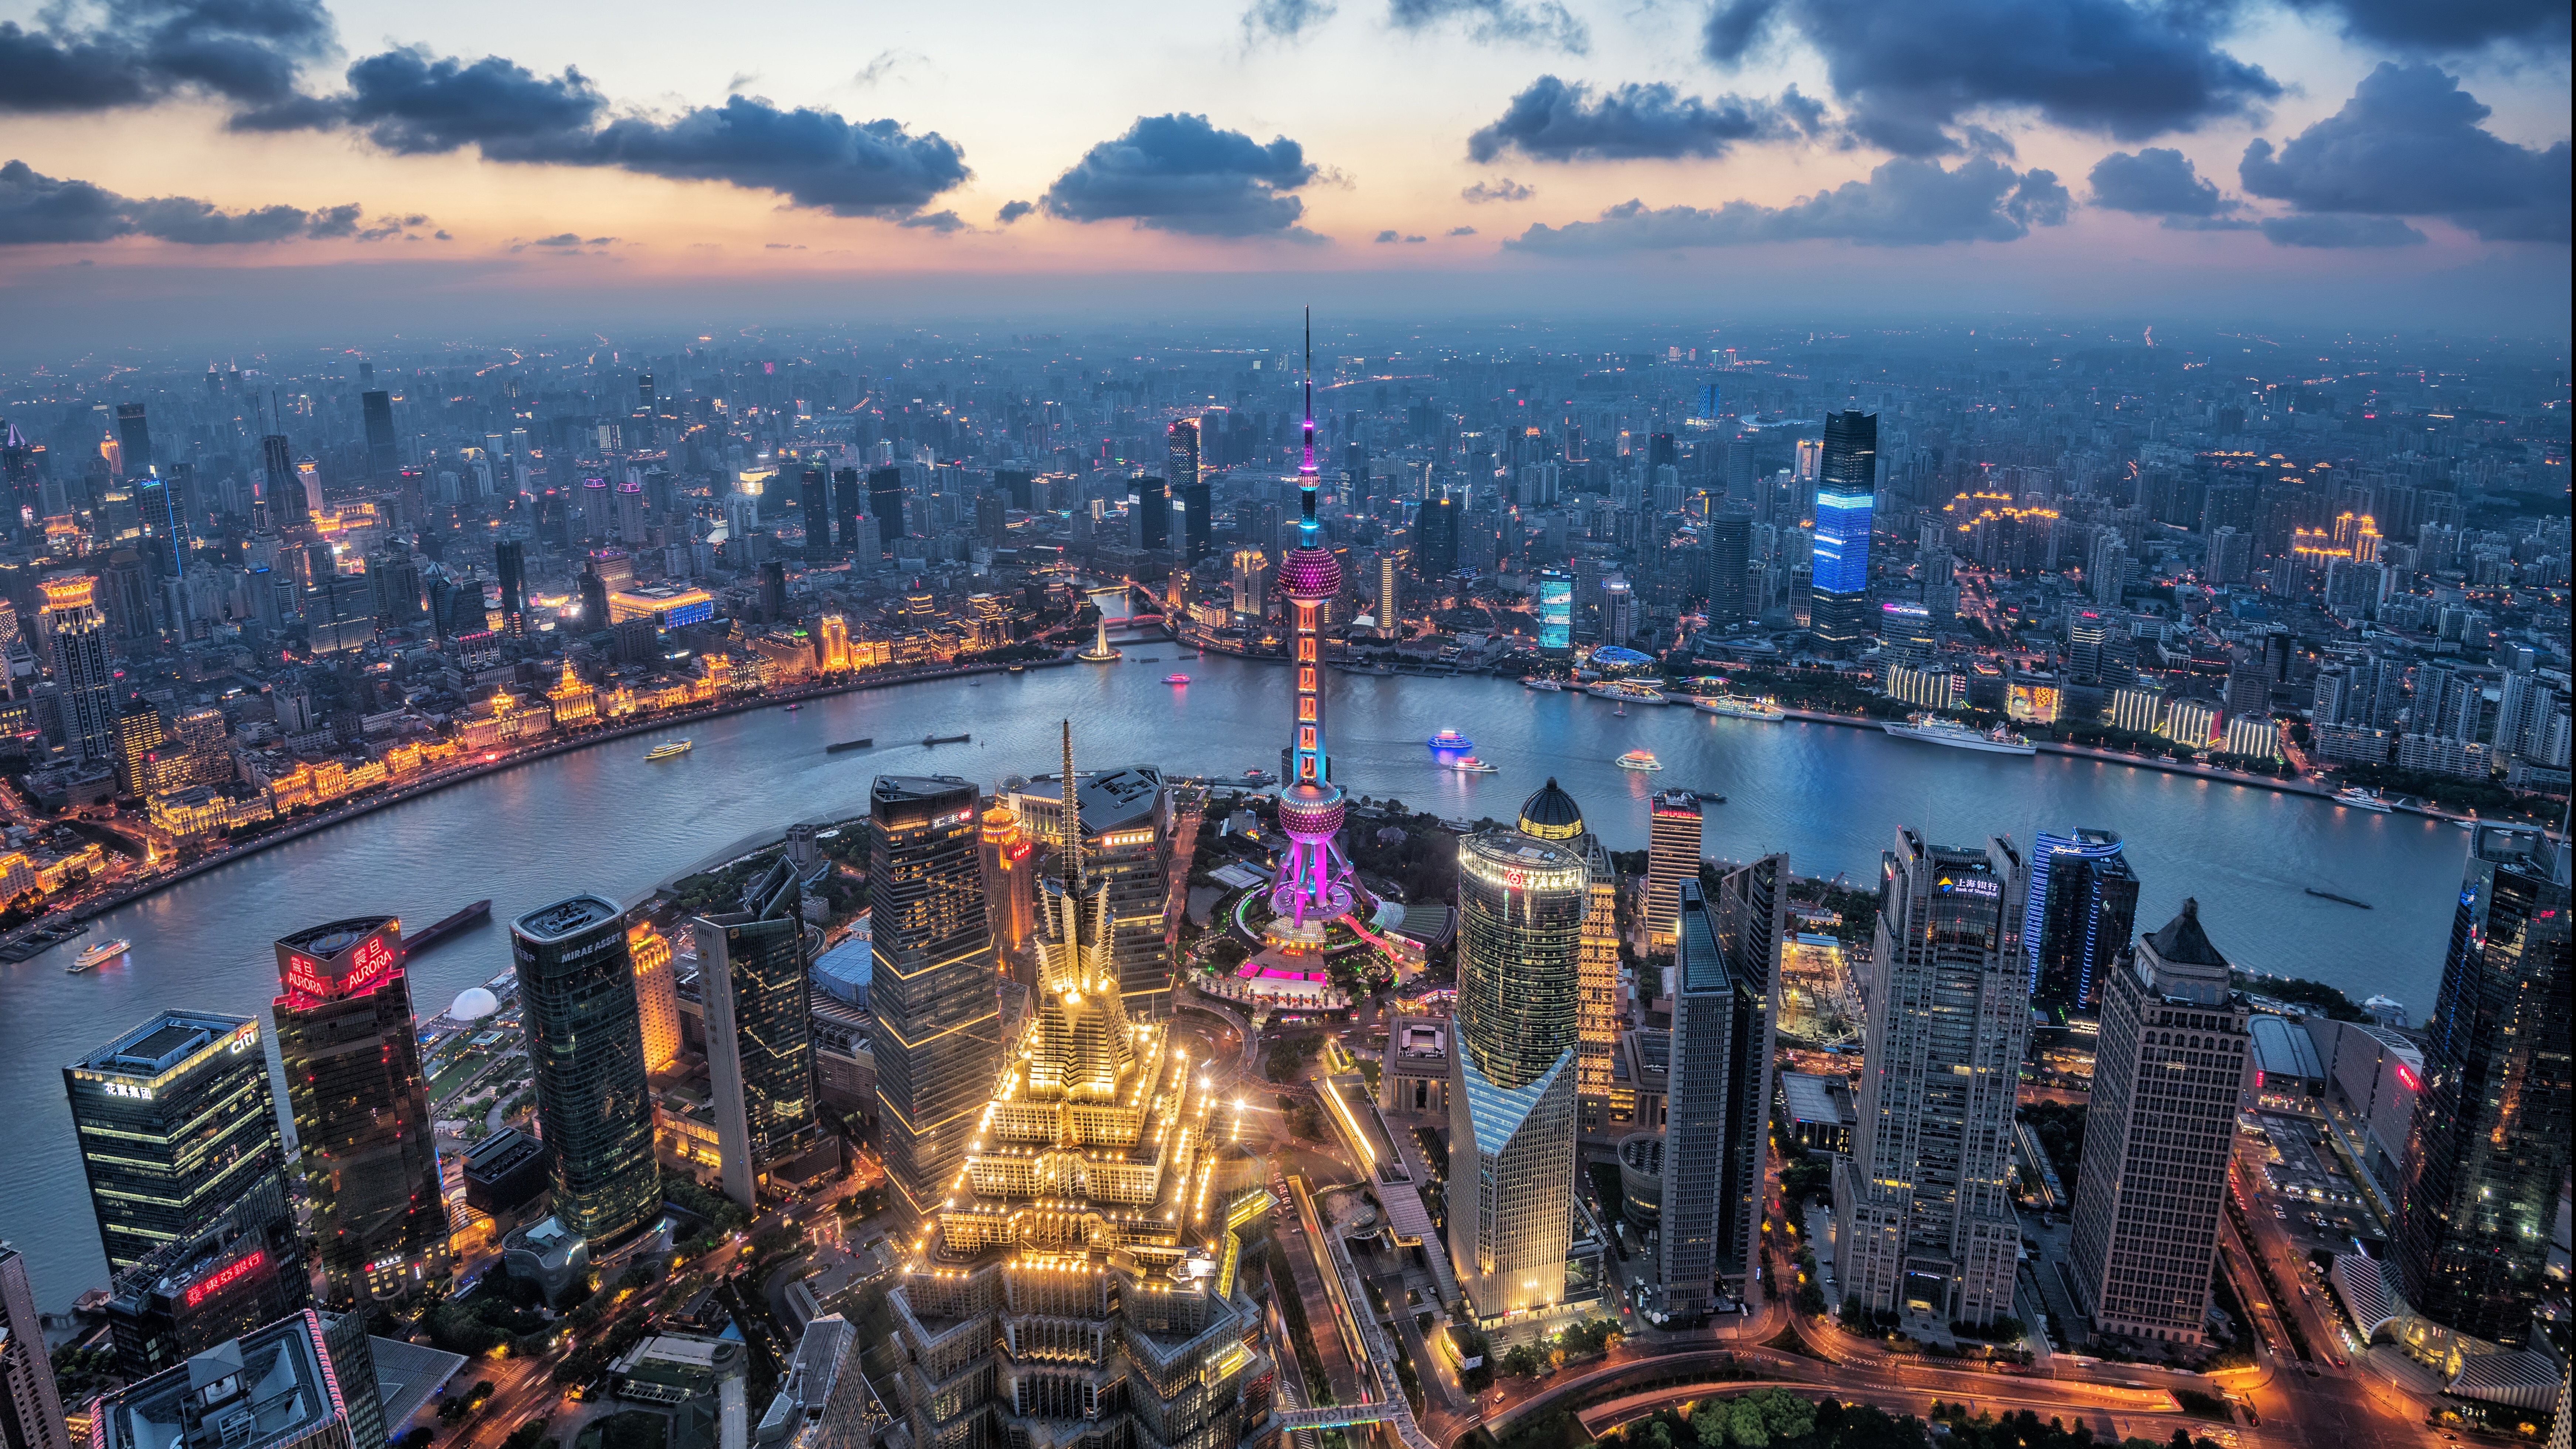 Shanghai’s cityscape overlooking the financial district and the Huangpu River. The prosperous city belies the struggle among millions of graduates on weak first-job pay. Photo: Handout